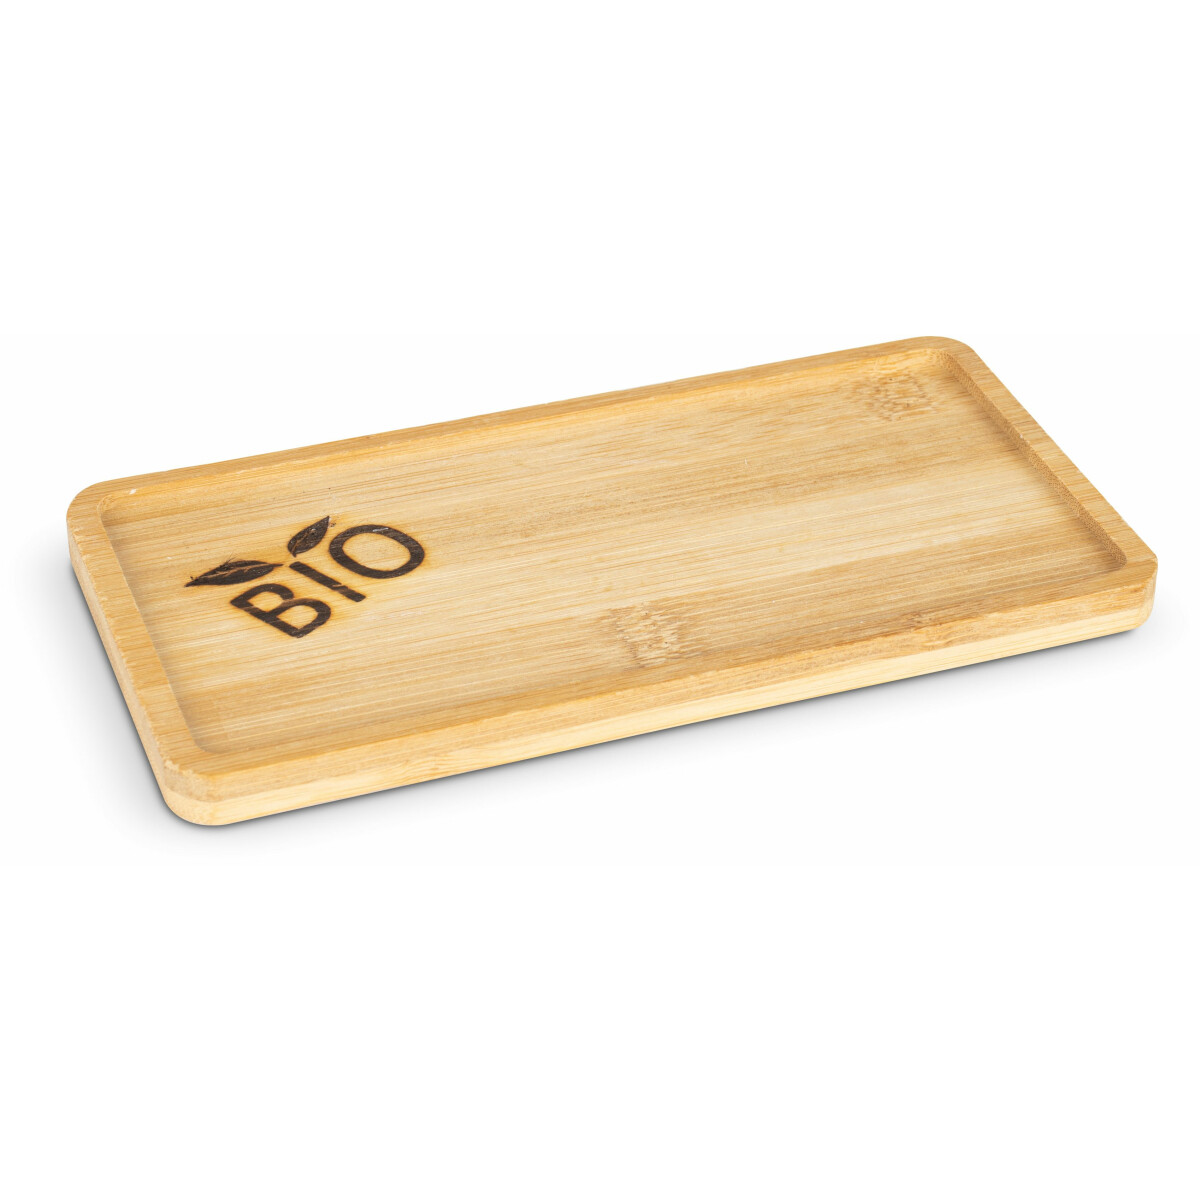 Bamboo tray with treatment for contact with water...